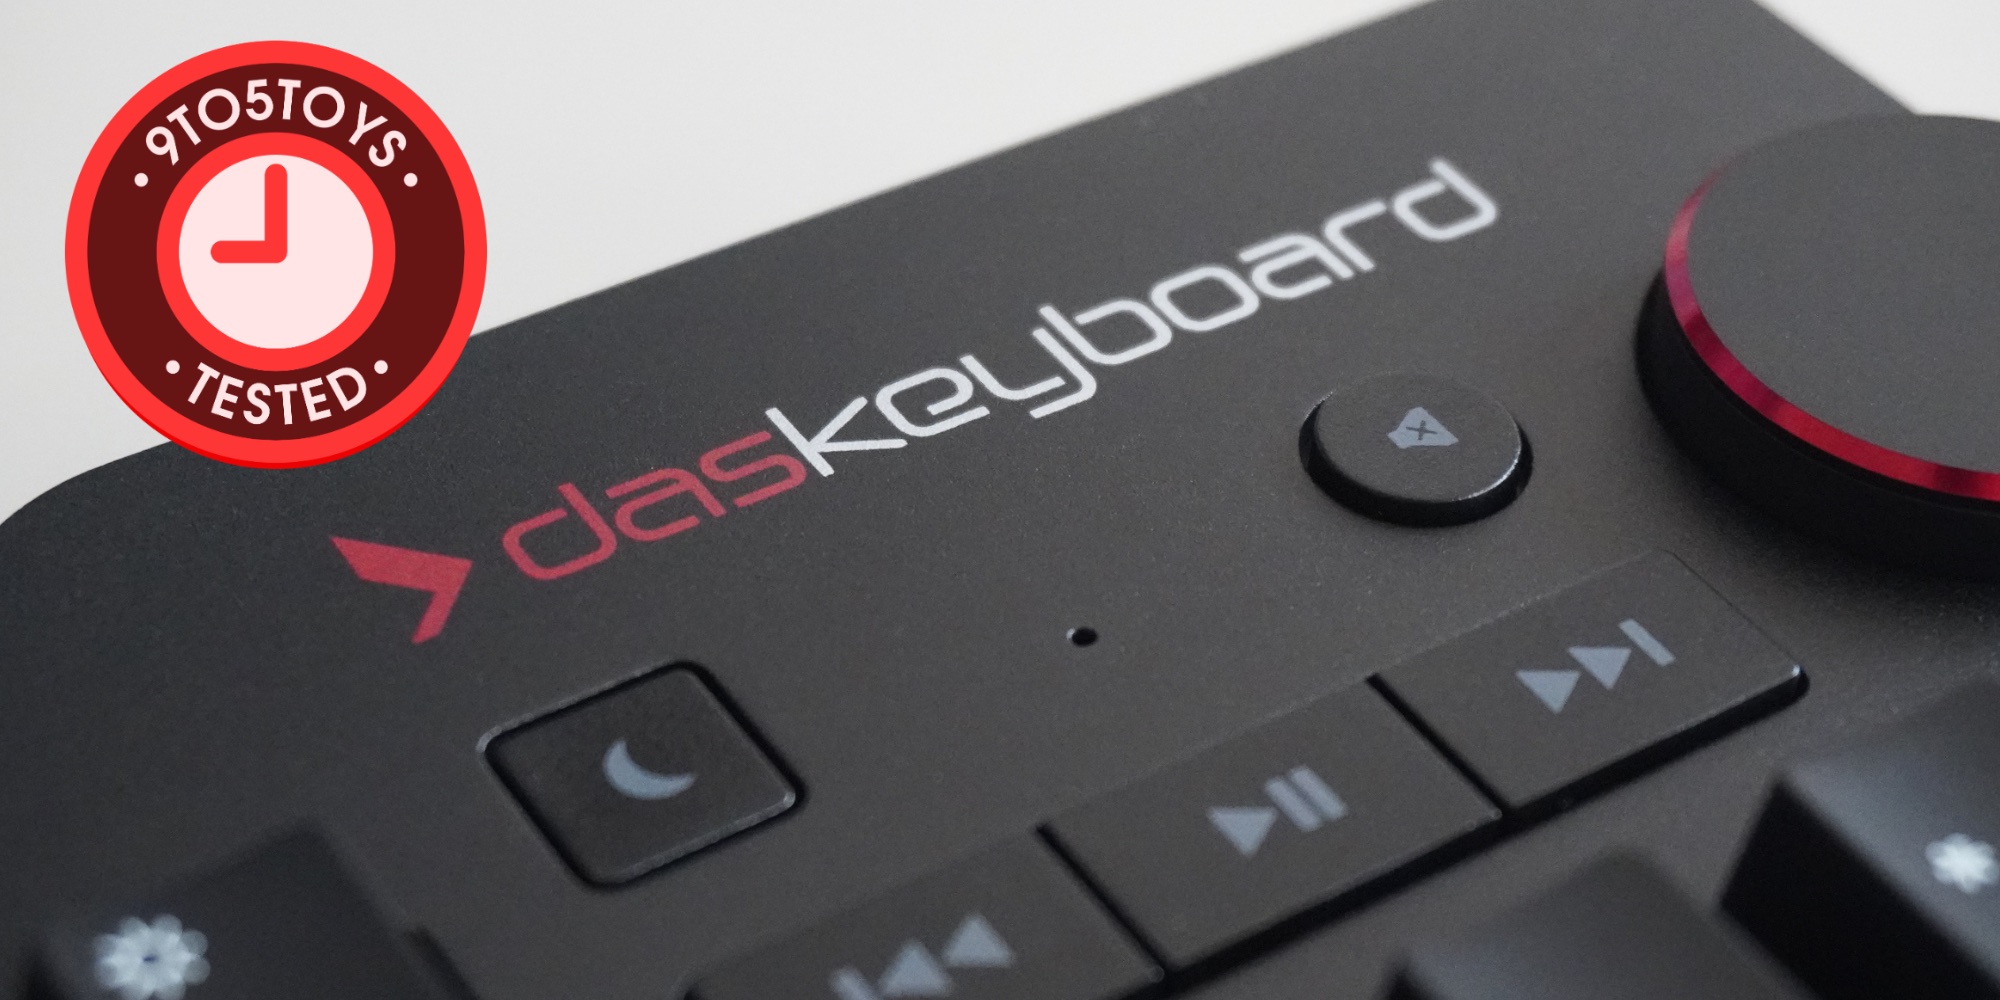 das keyboard 4 professional for mac review